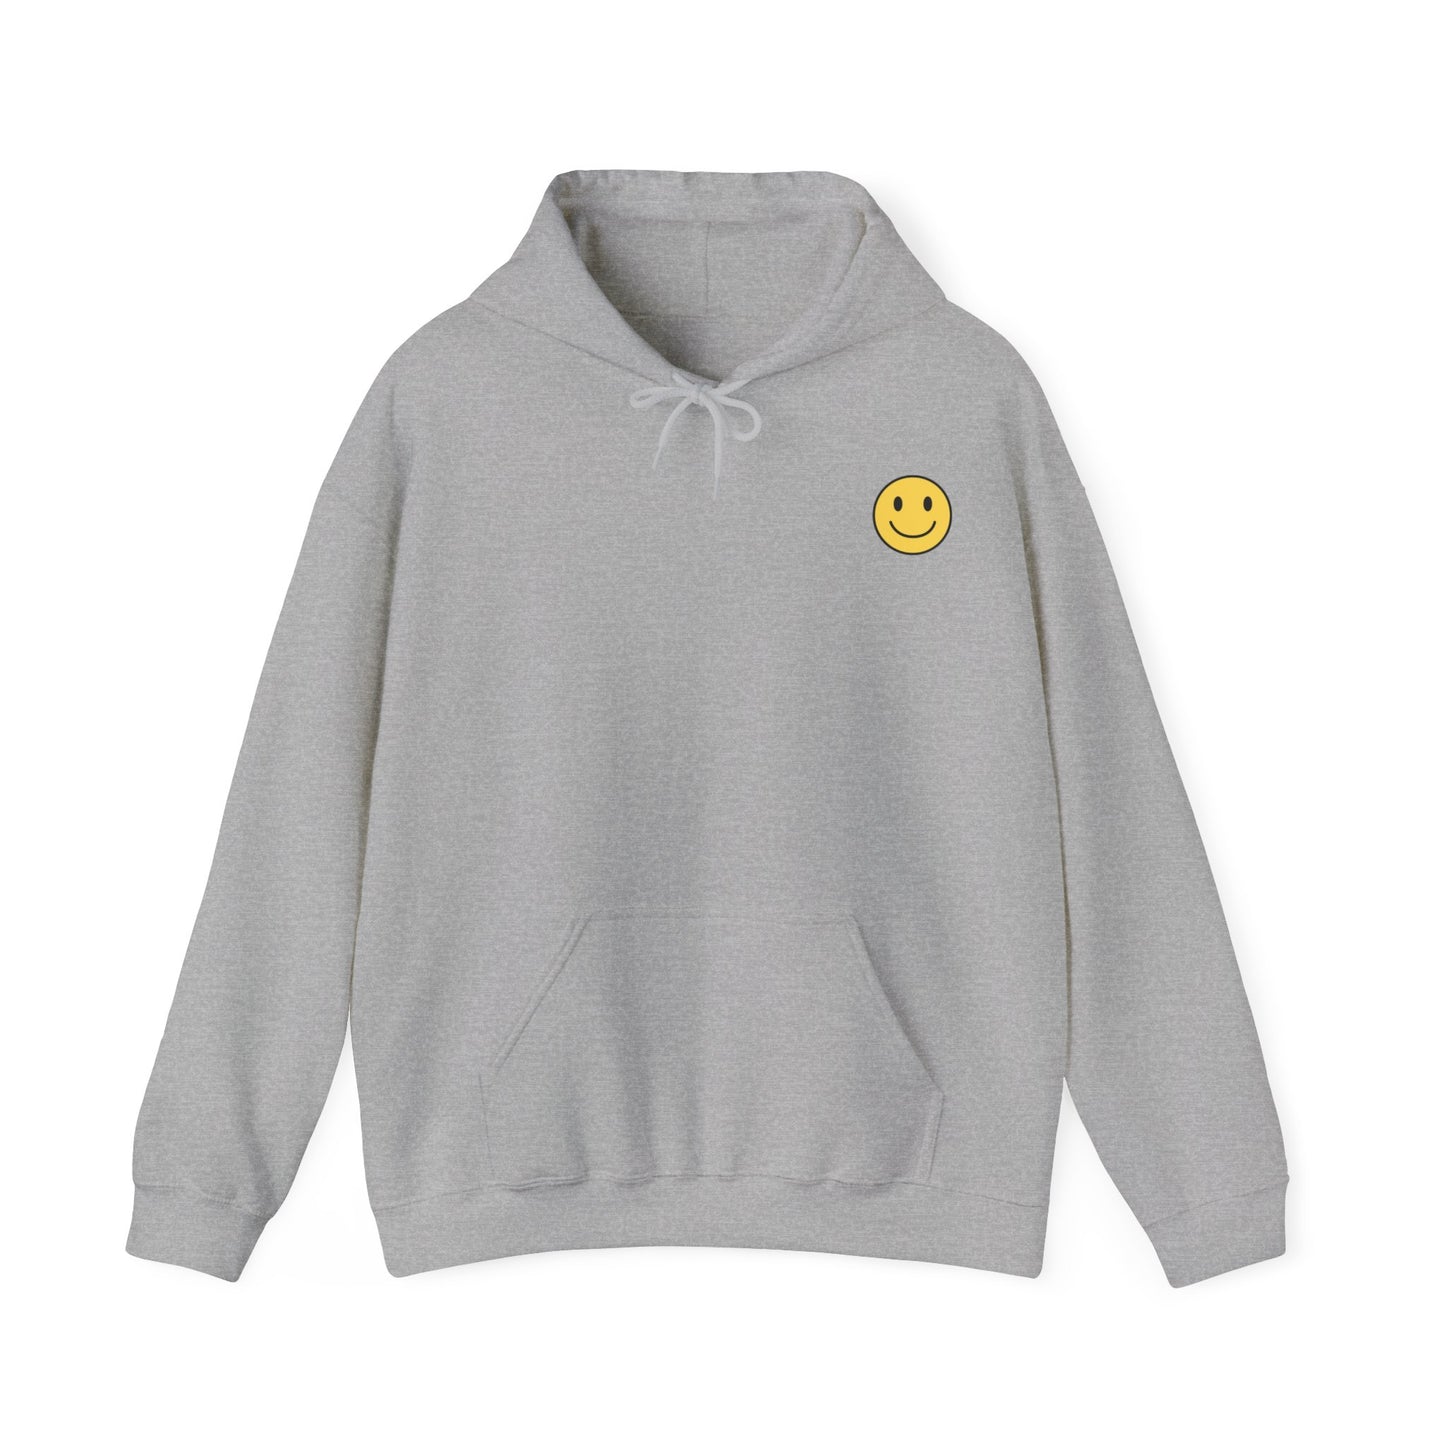 Have a Nice Day - Cozy Comfort Unisex Heavy Blend Hooded Sweatshirt: Warmth Meets Style